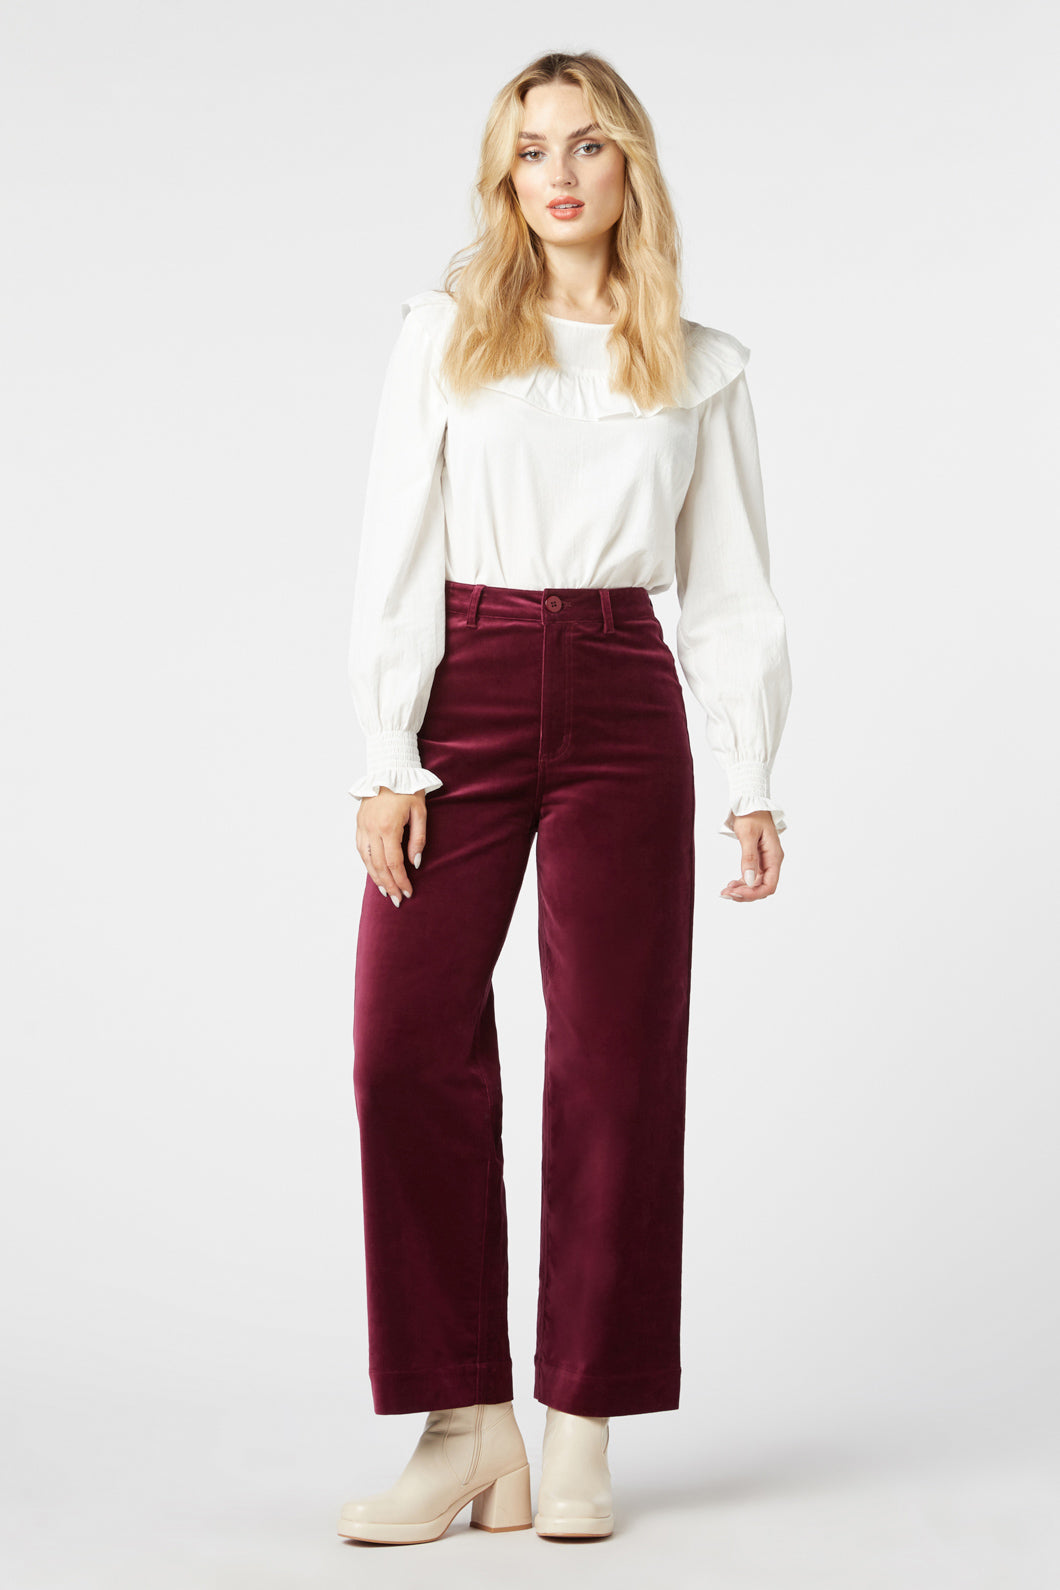 Shop Velvet WideLeg Pants for Women from latest collection at Forever 21   332500